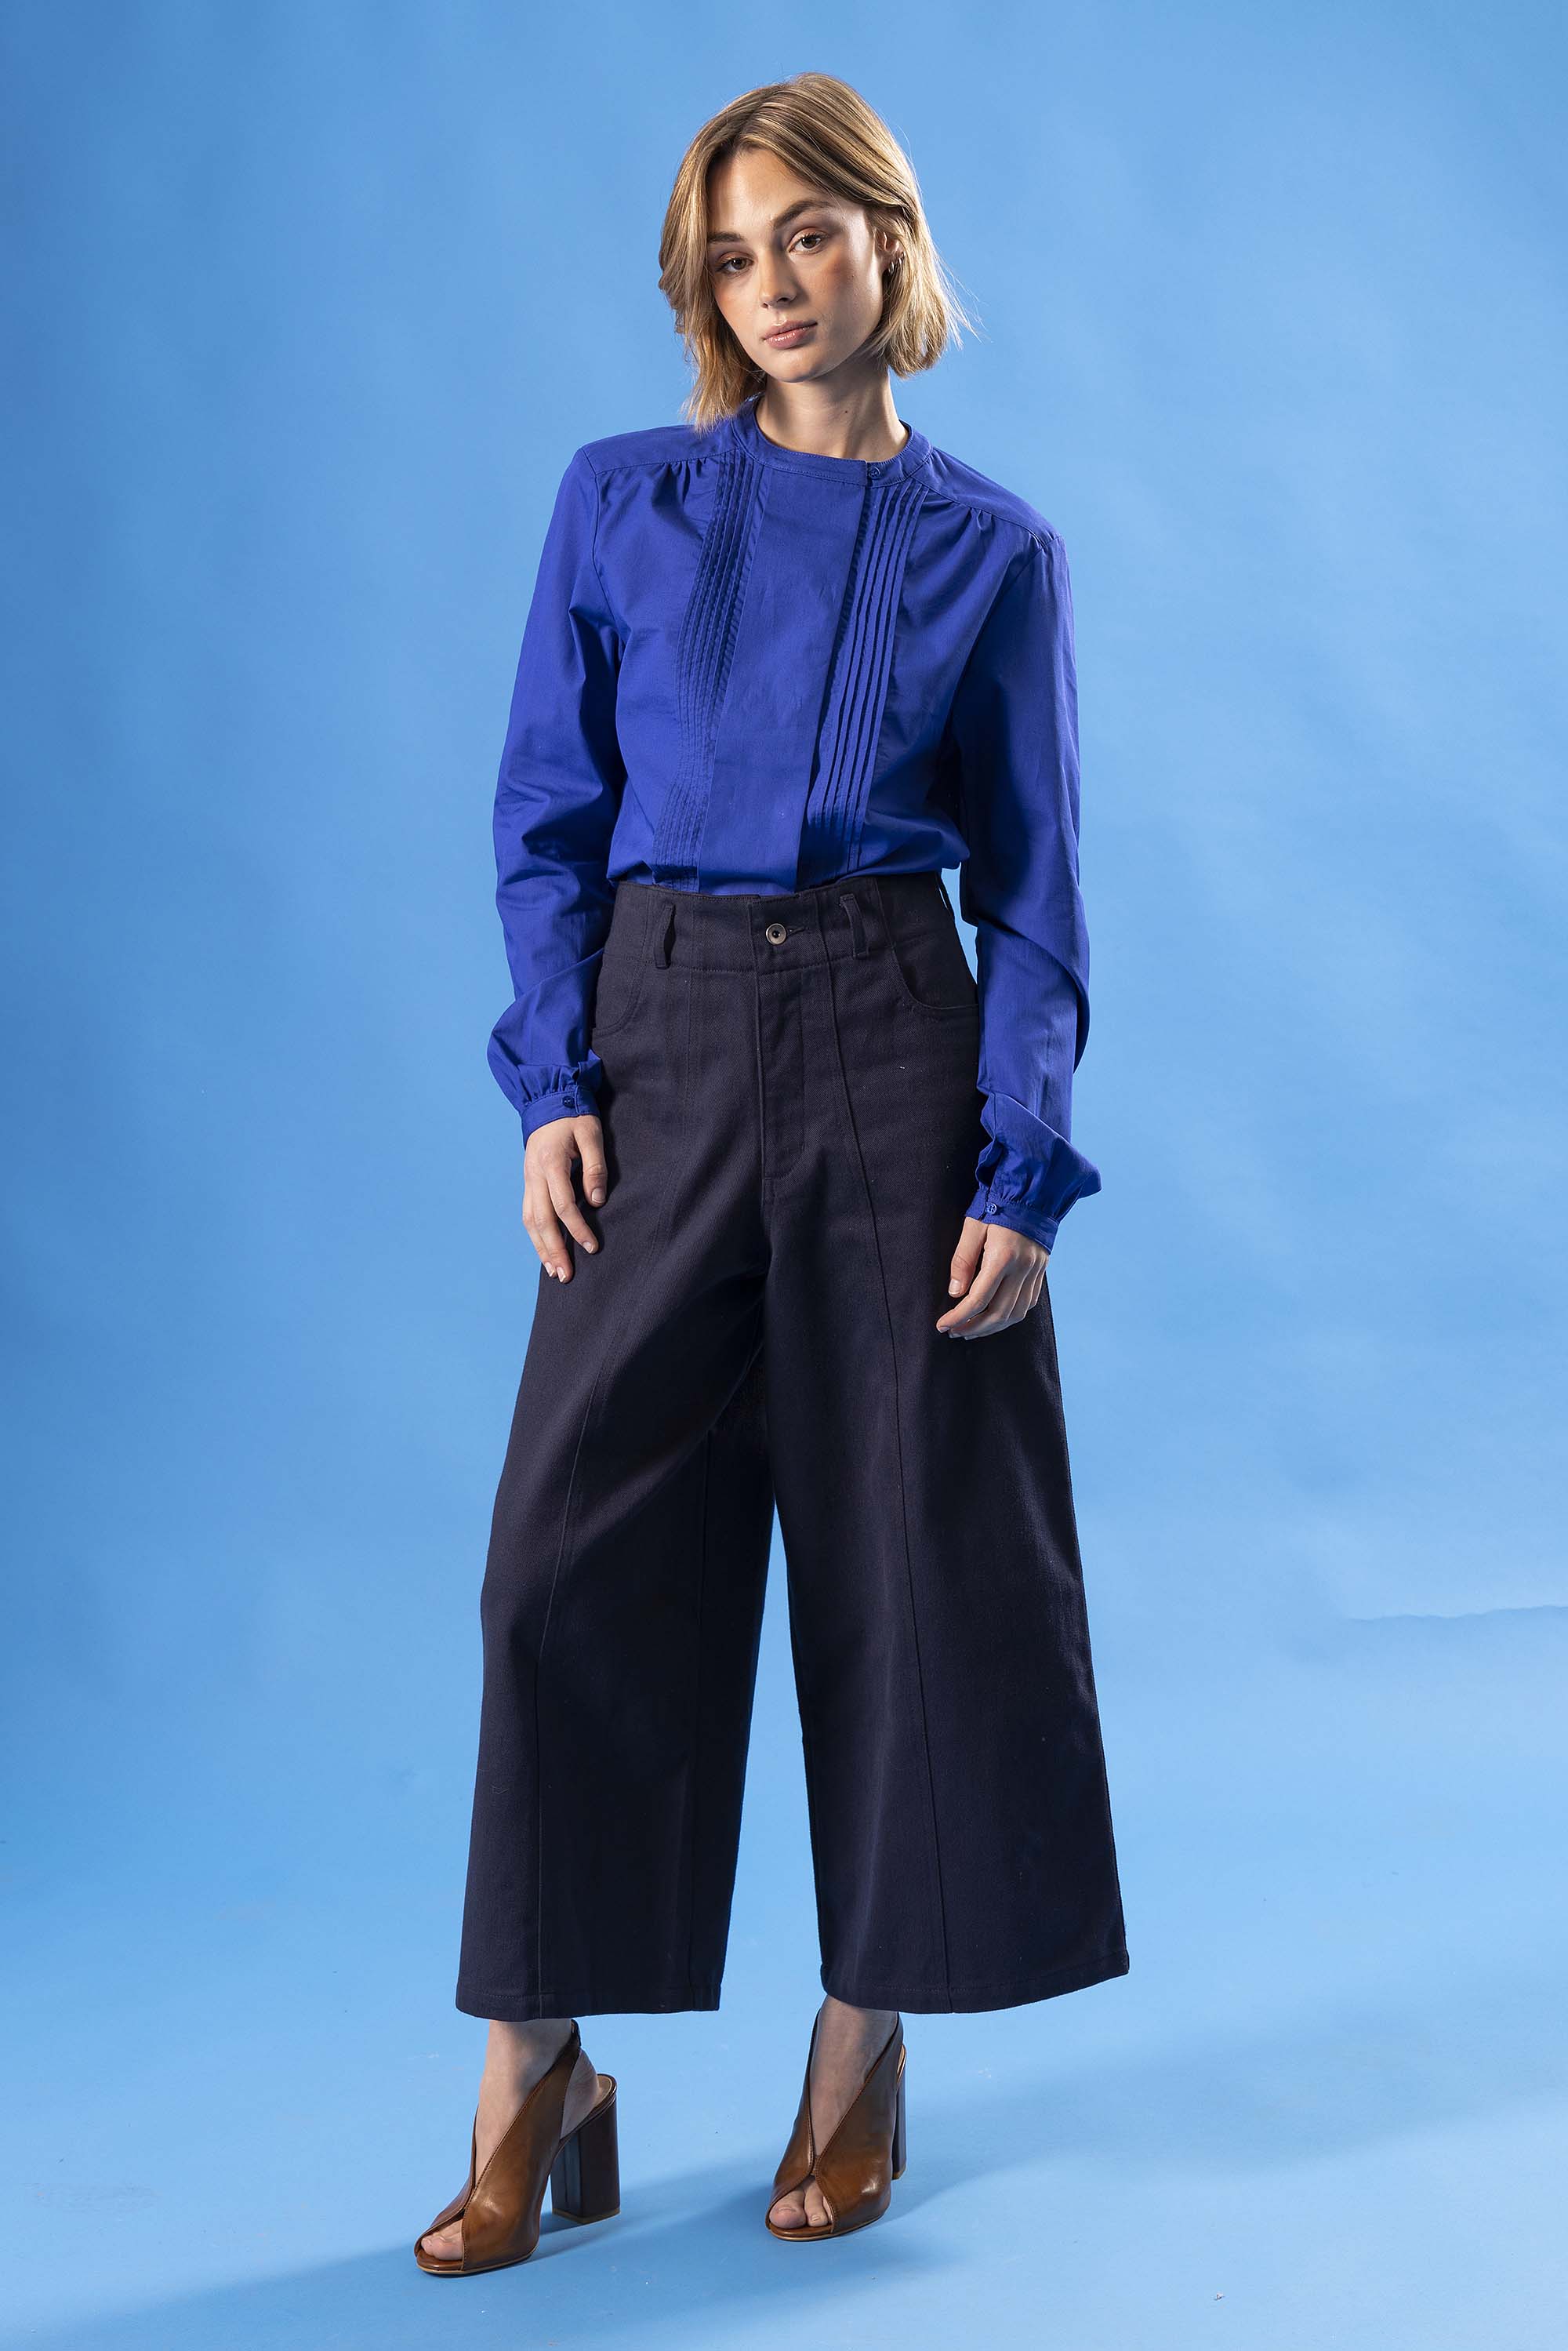 Women's navy blue pants with high waist and relaxed silhouette